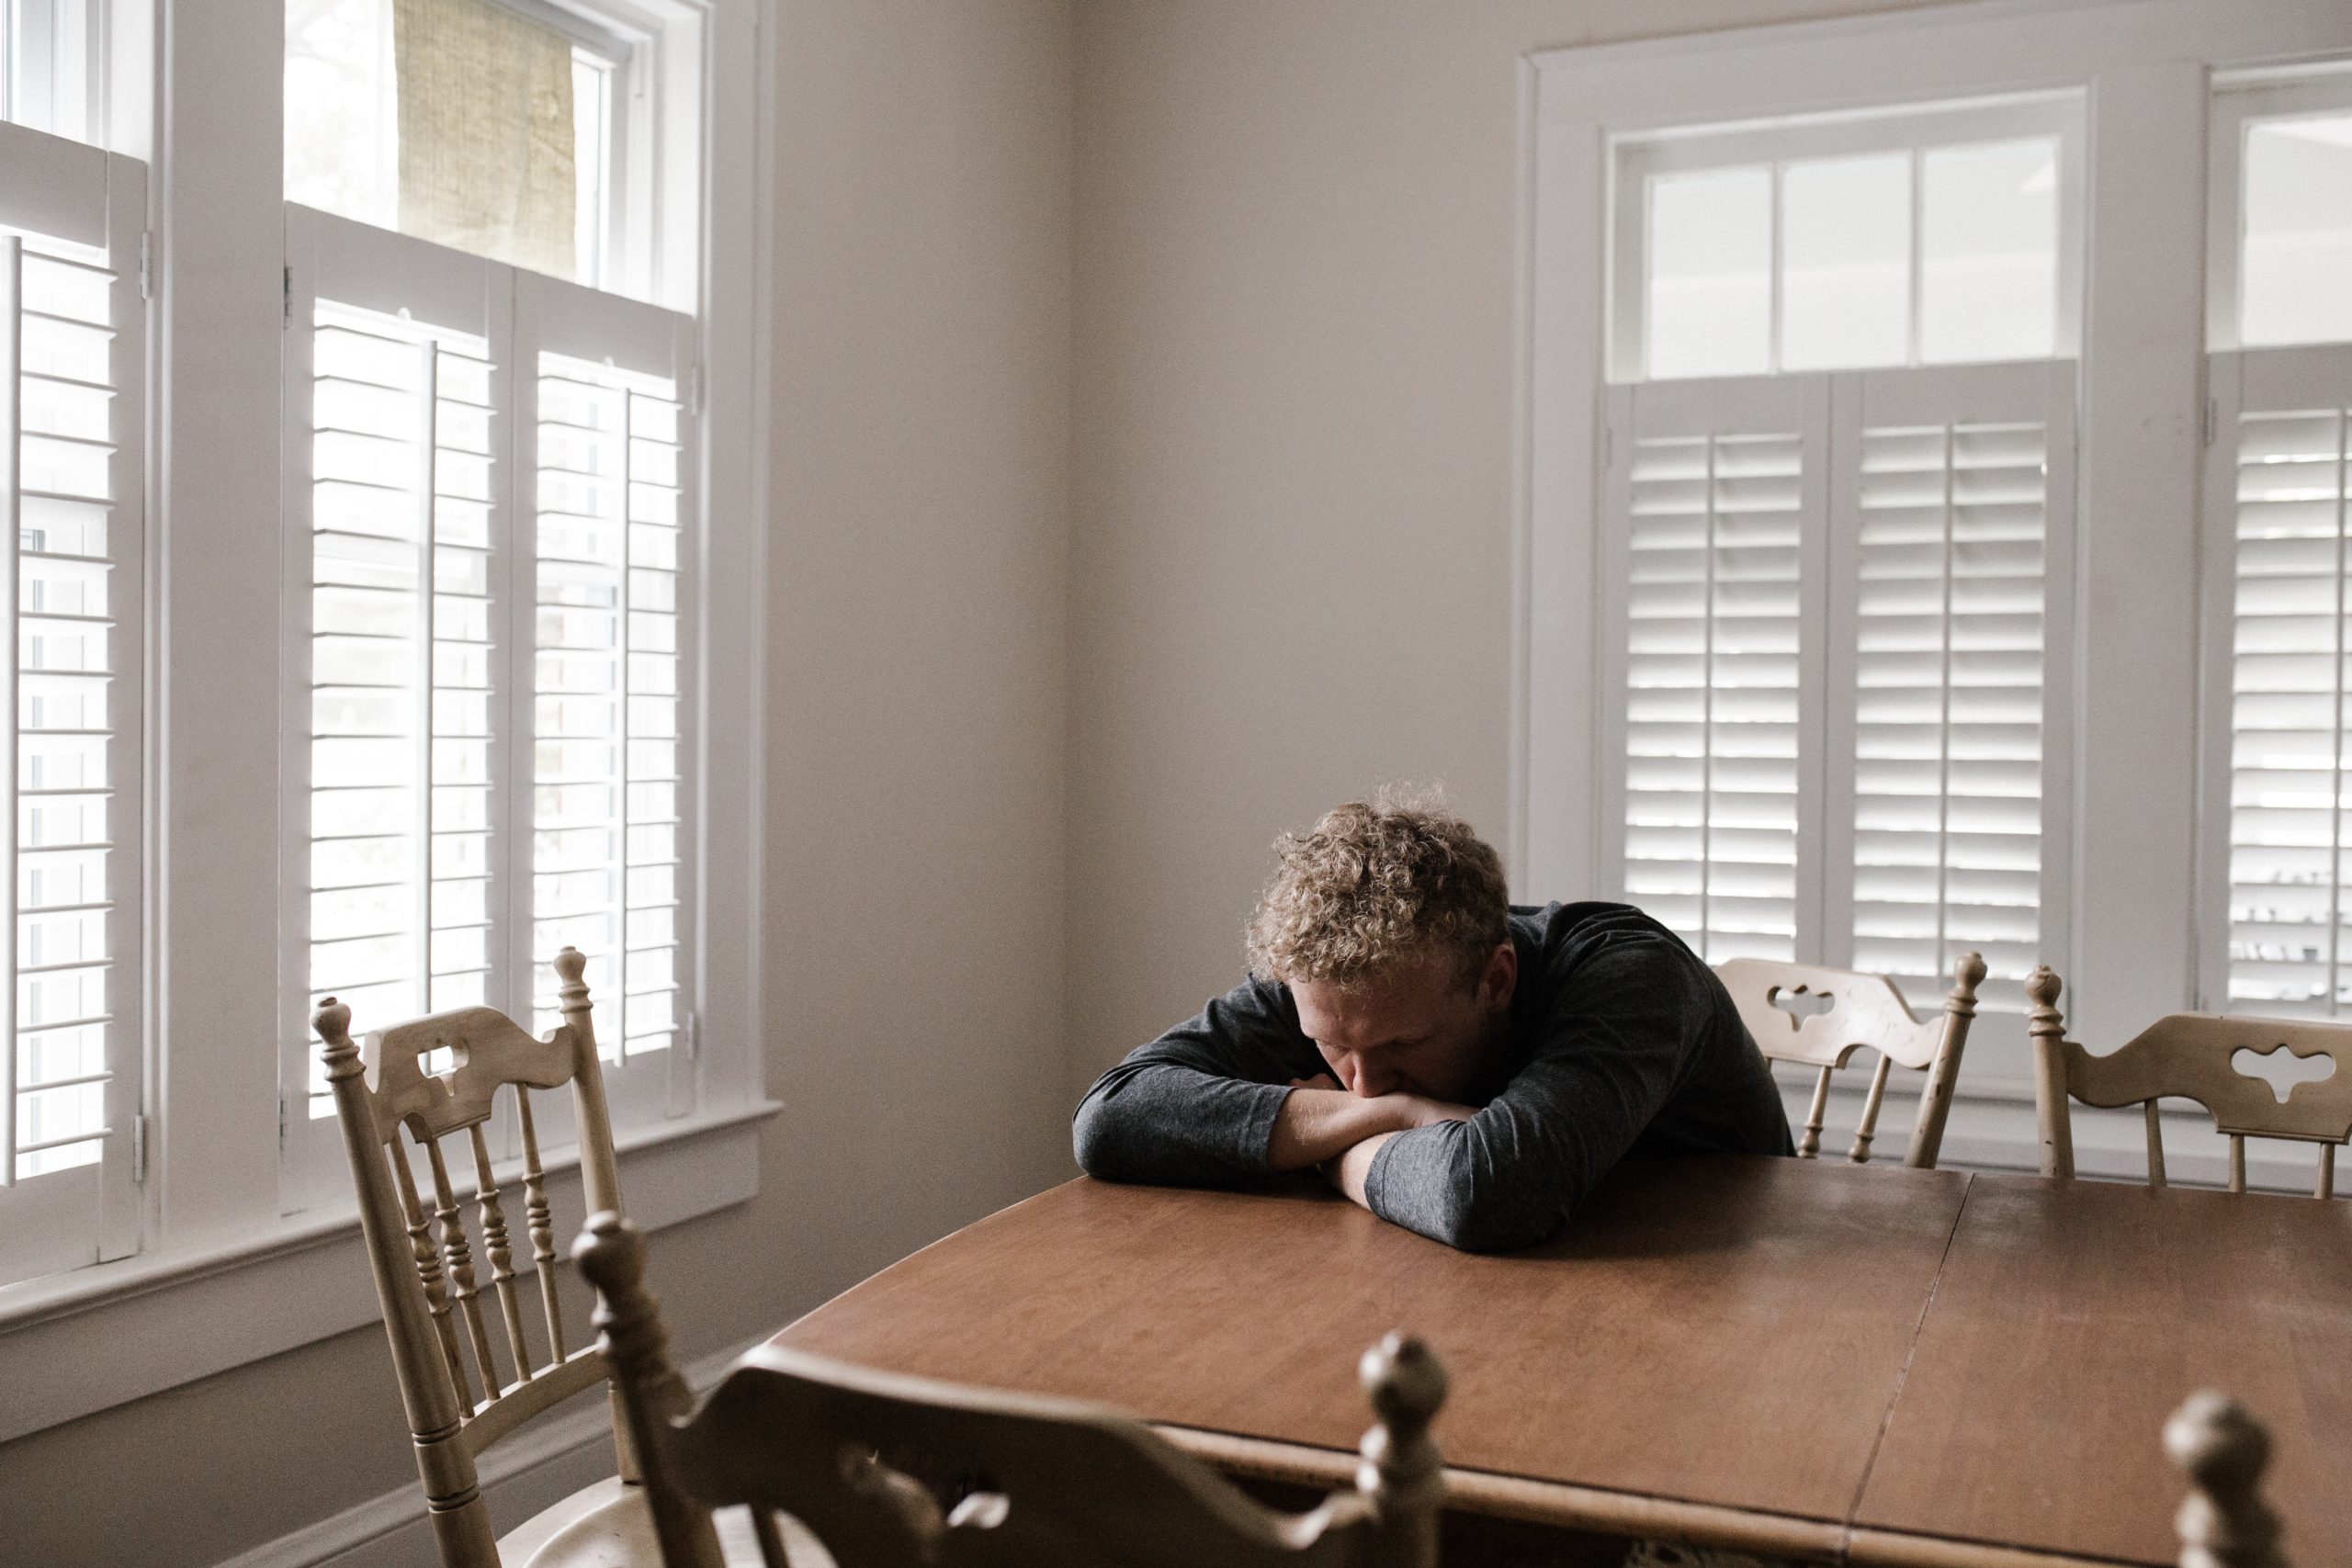 young man feeling anxious sitting at the dining room table with his face pressed into arms on the table. window blinds are open behind and to the right of him